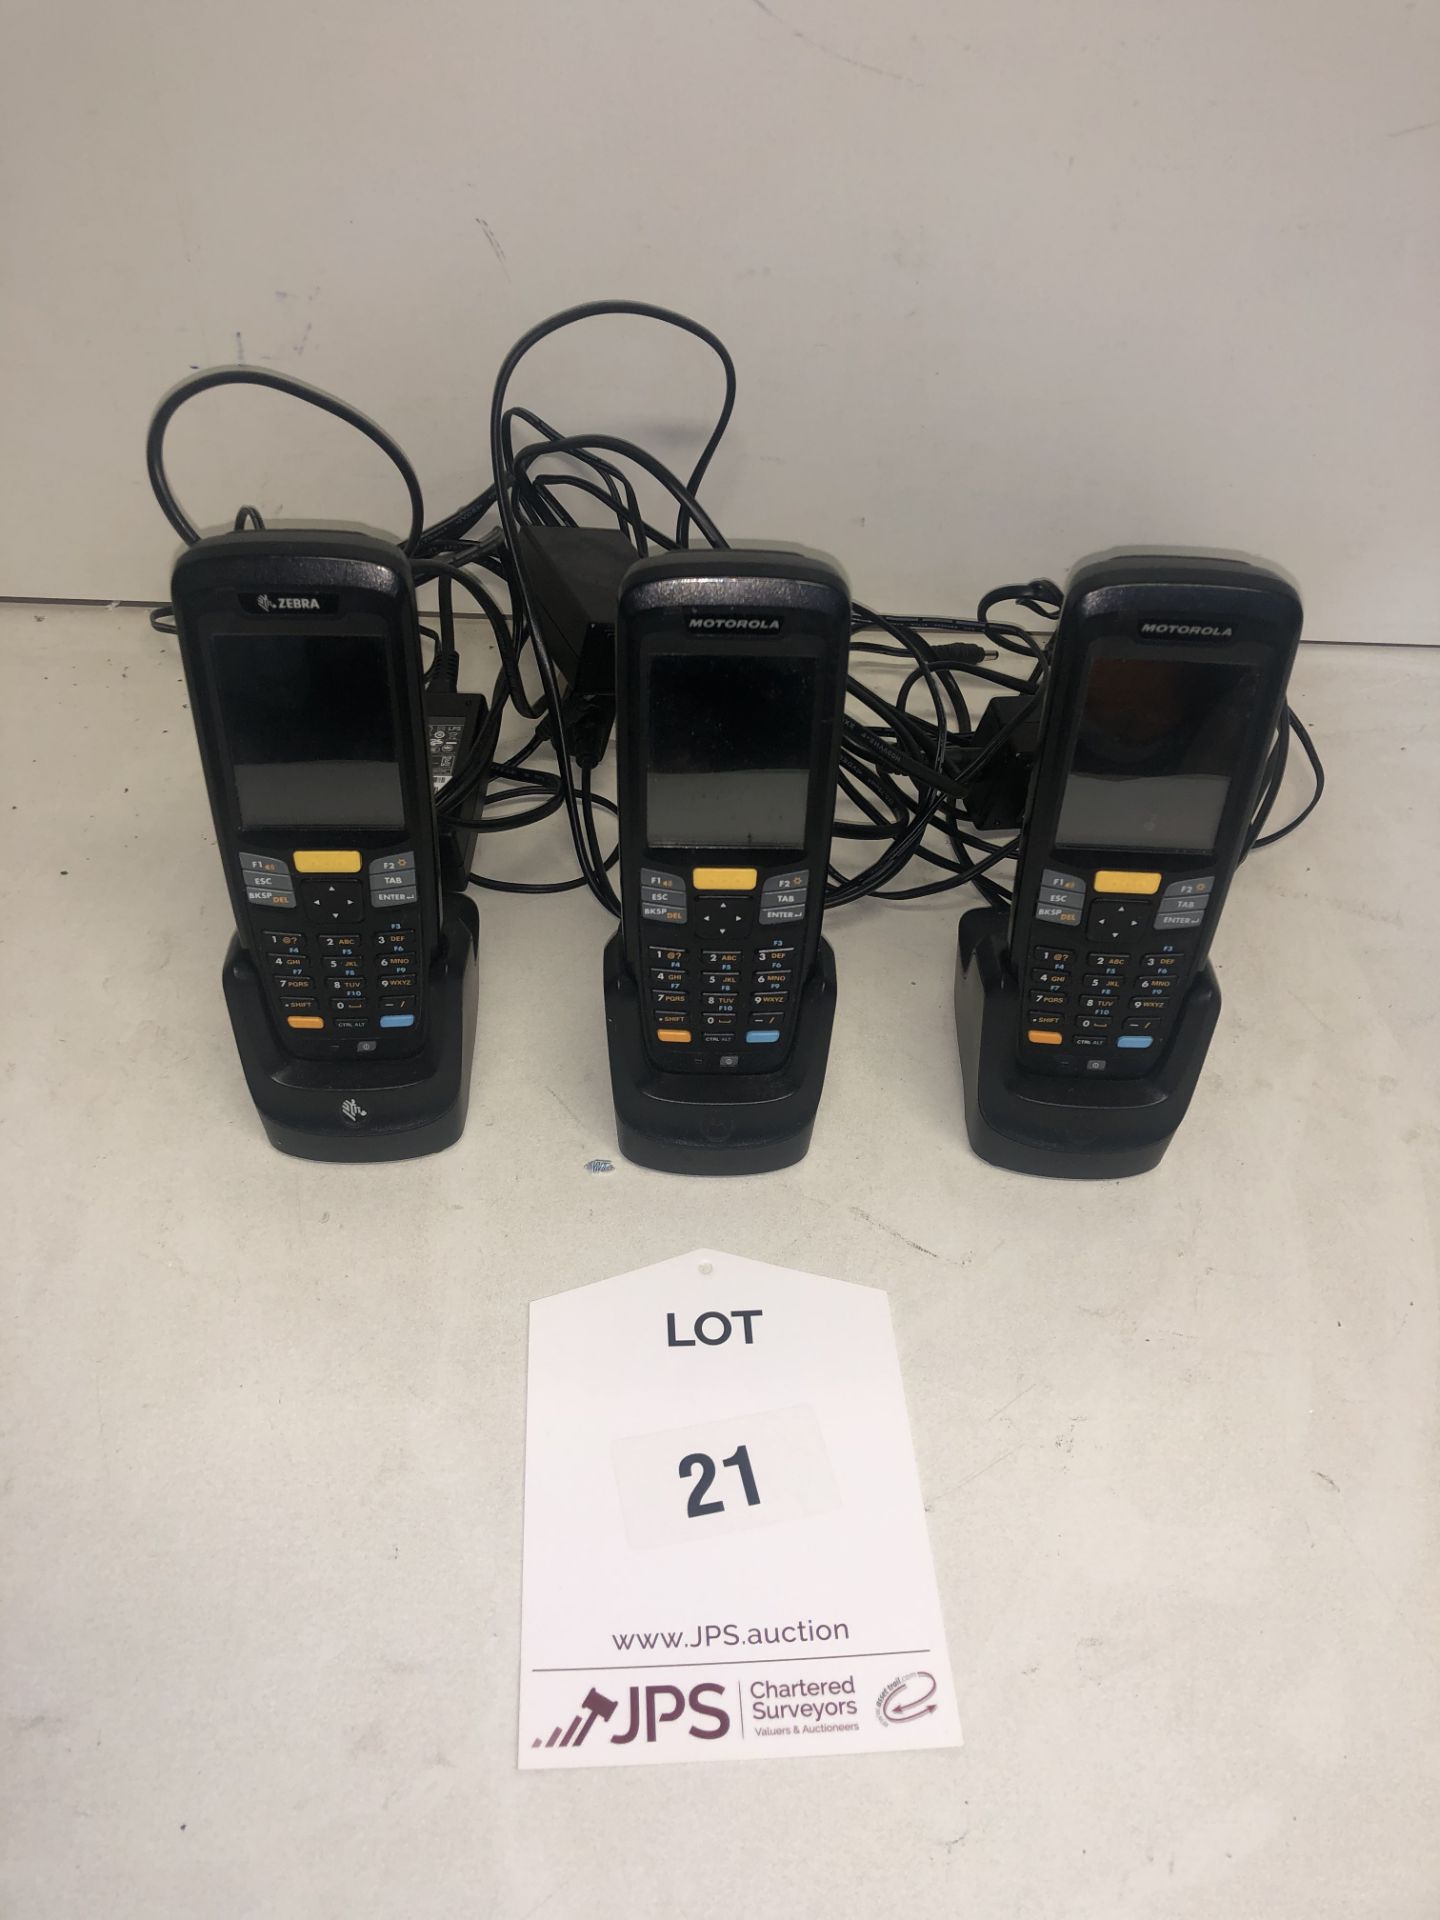 3 x Various Mobile Logging/Scanning Phones w/ Charging Stations